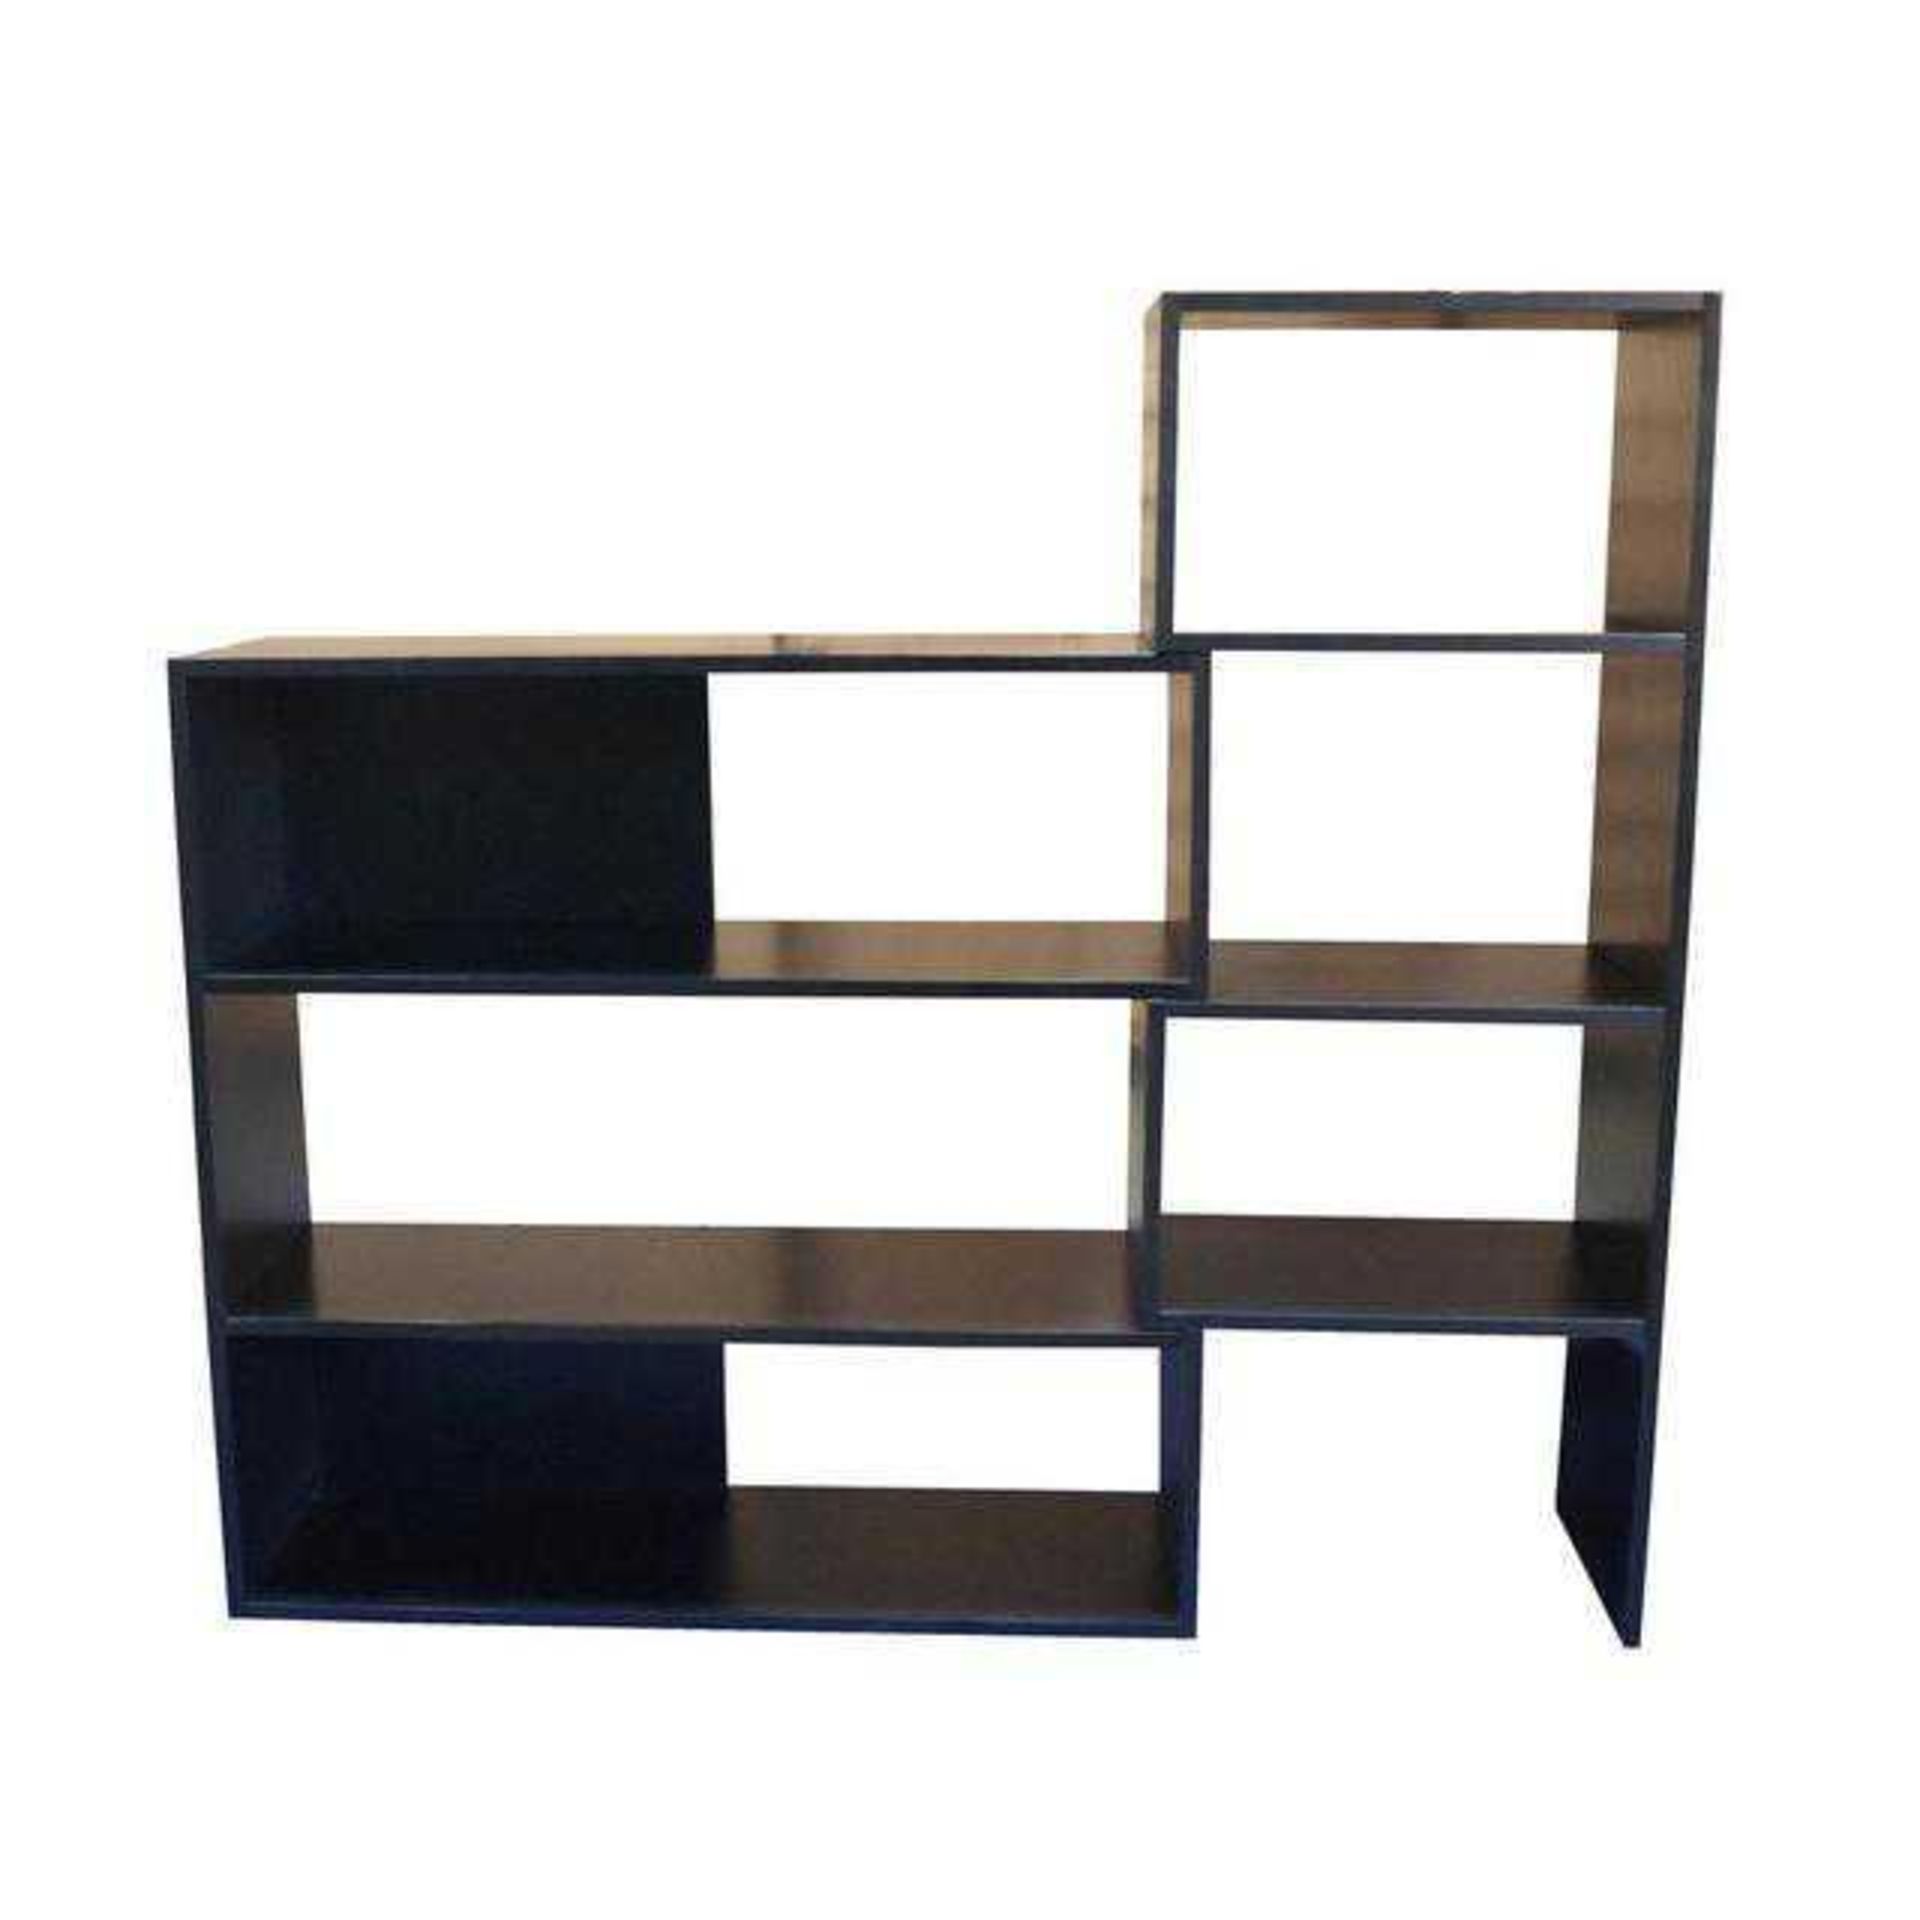 RRP £600 Sourced From Debenhams Brand New Boxed Fenton Adjustable Shelving Unit In Black (Appraisals